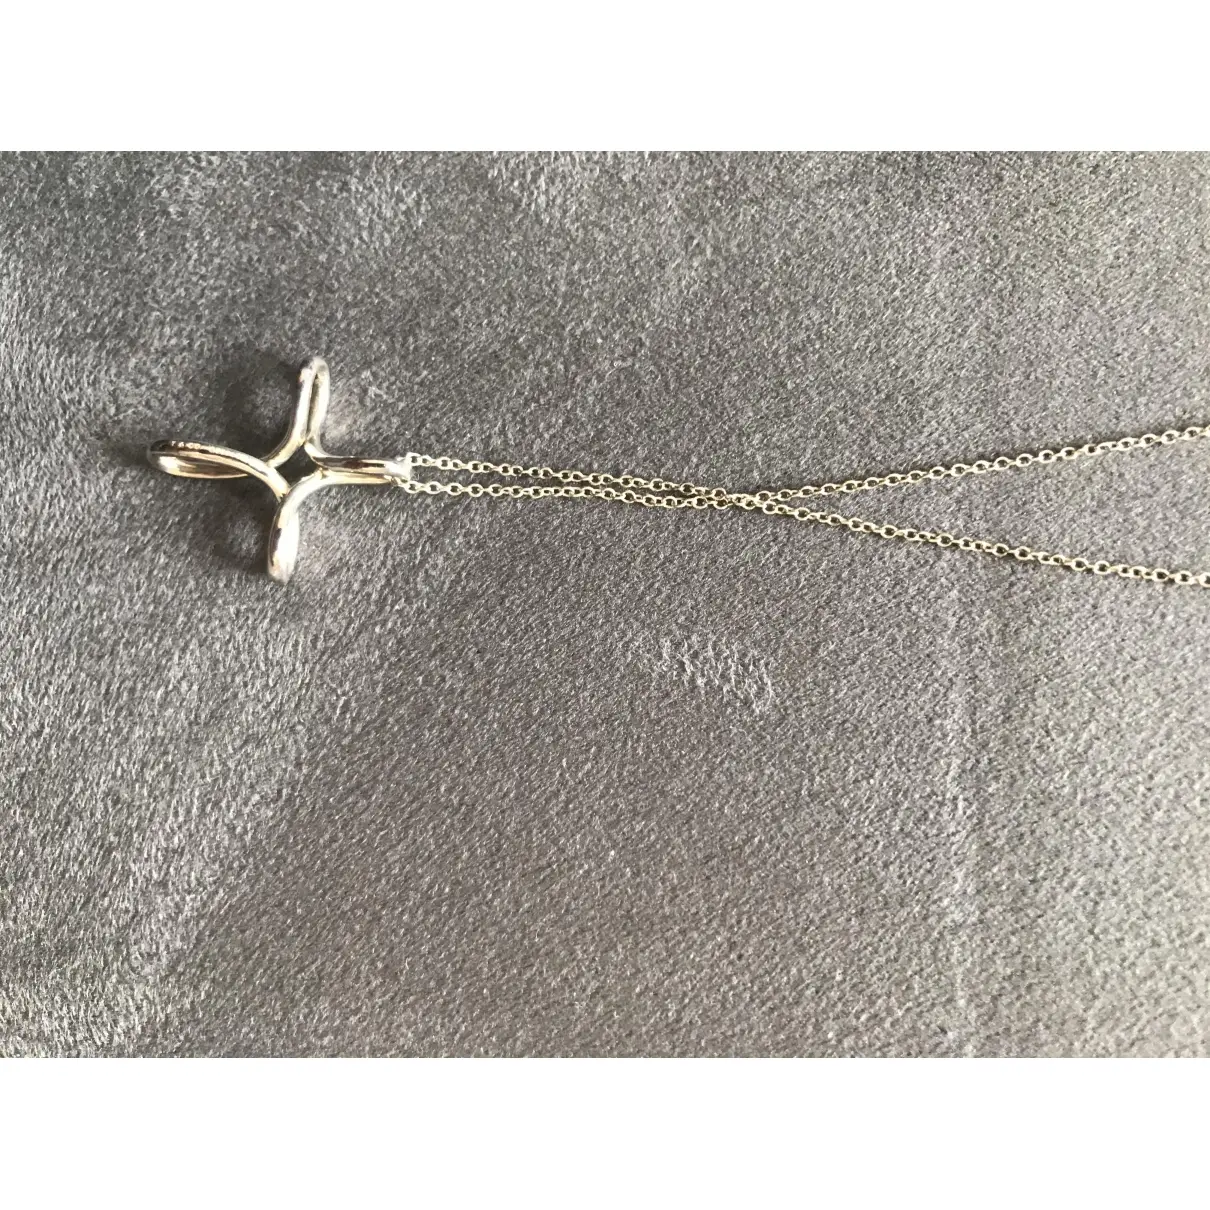 Tiffany & Co Silver necklace for sale